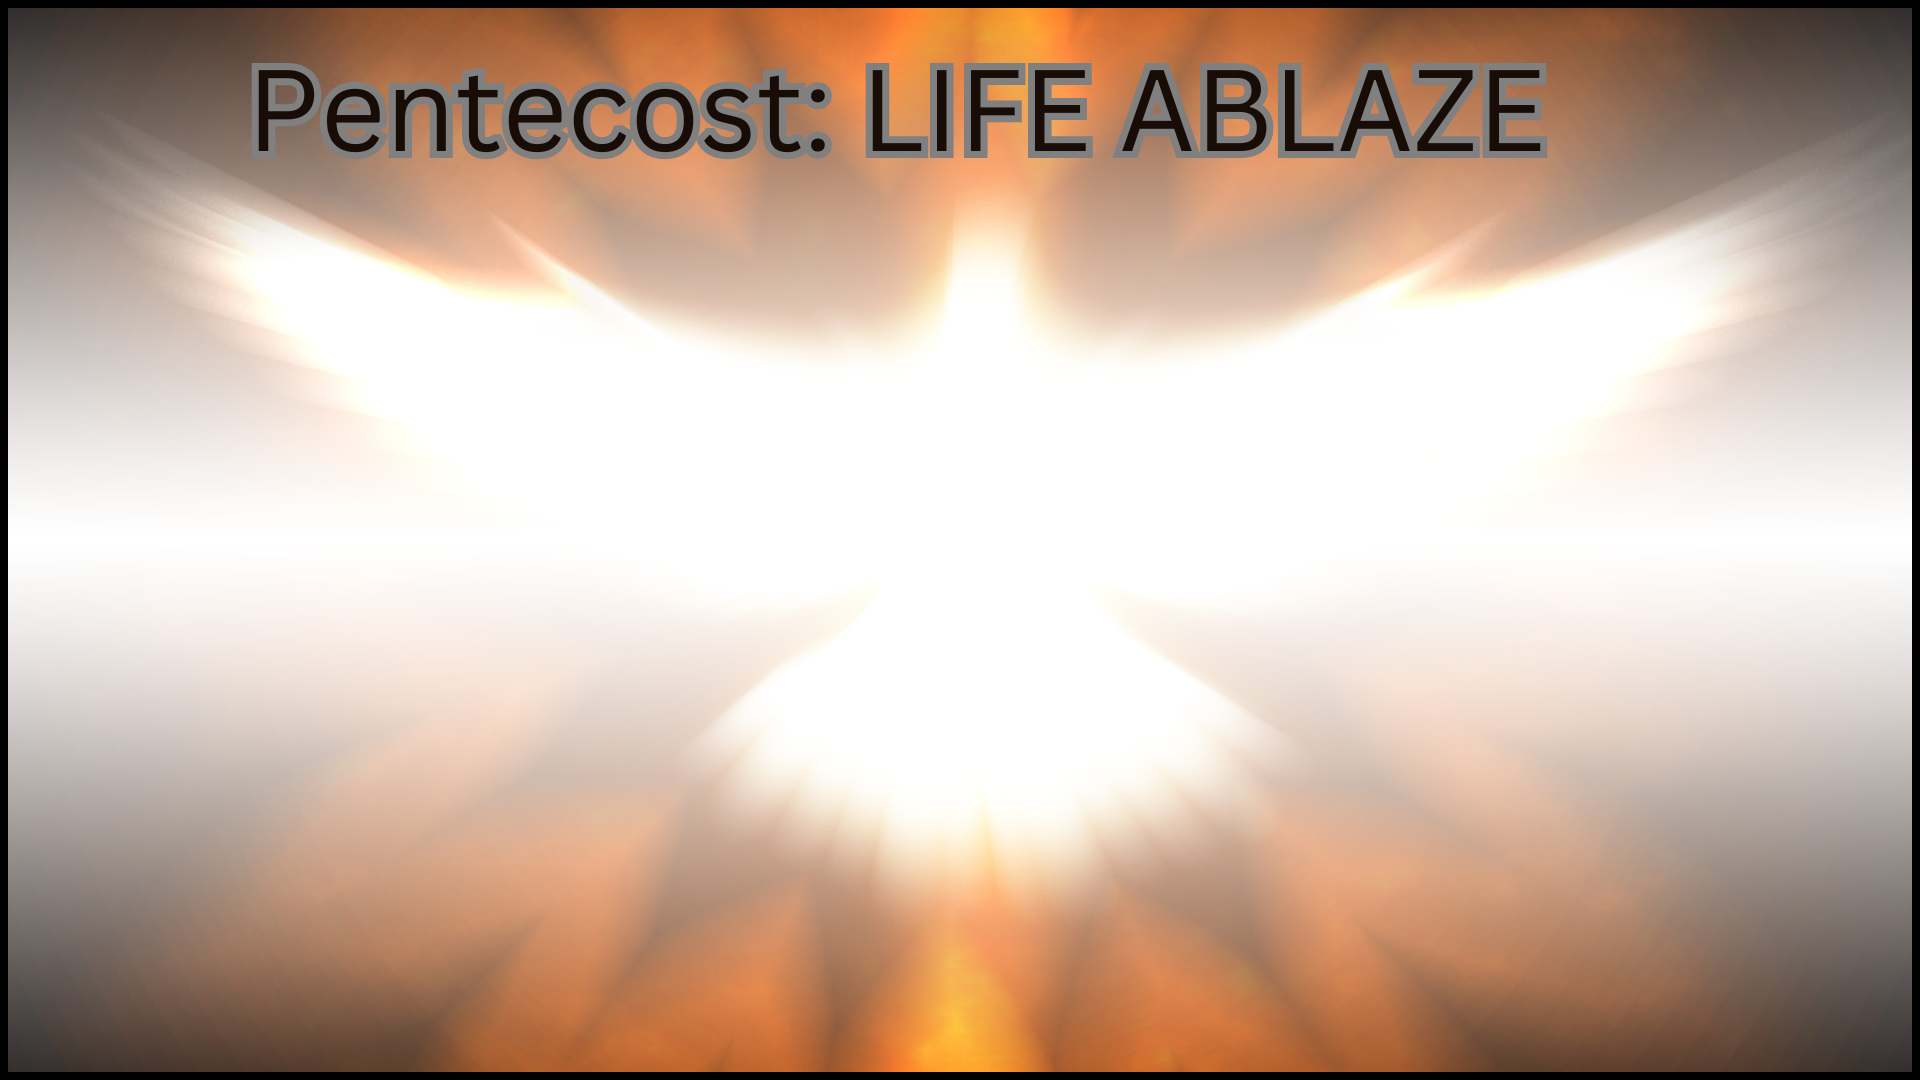 Featured image for “Pentecost: Life Ablaze”